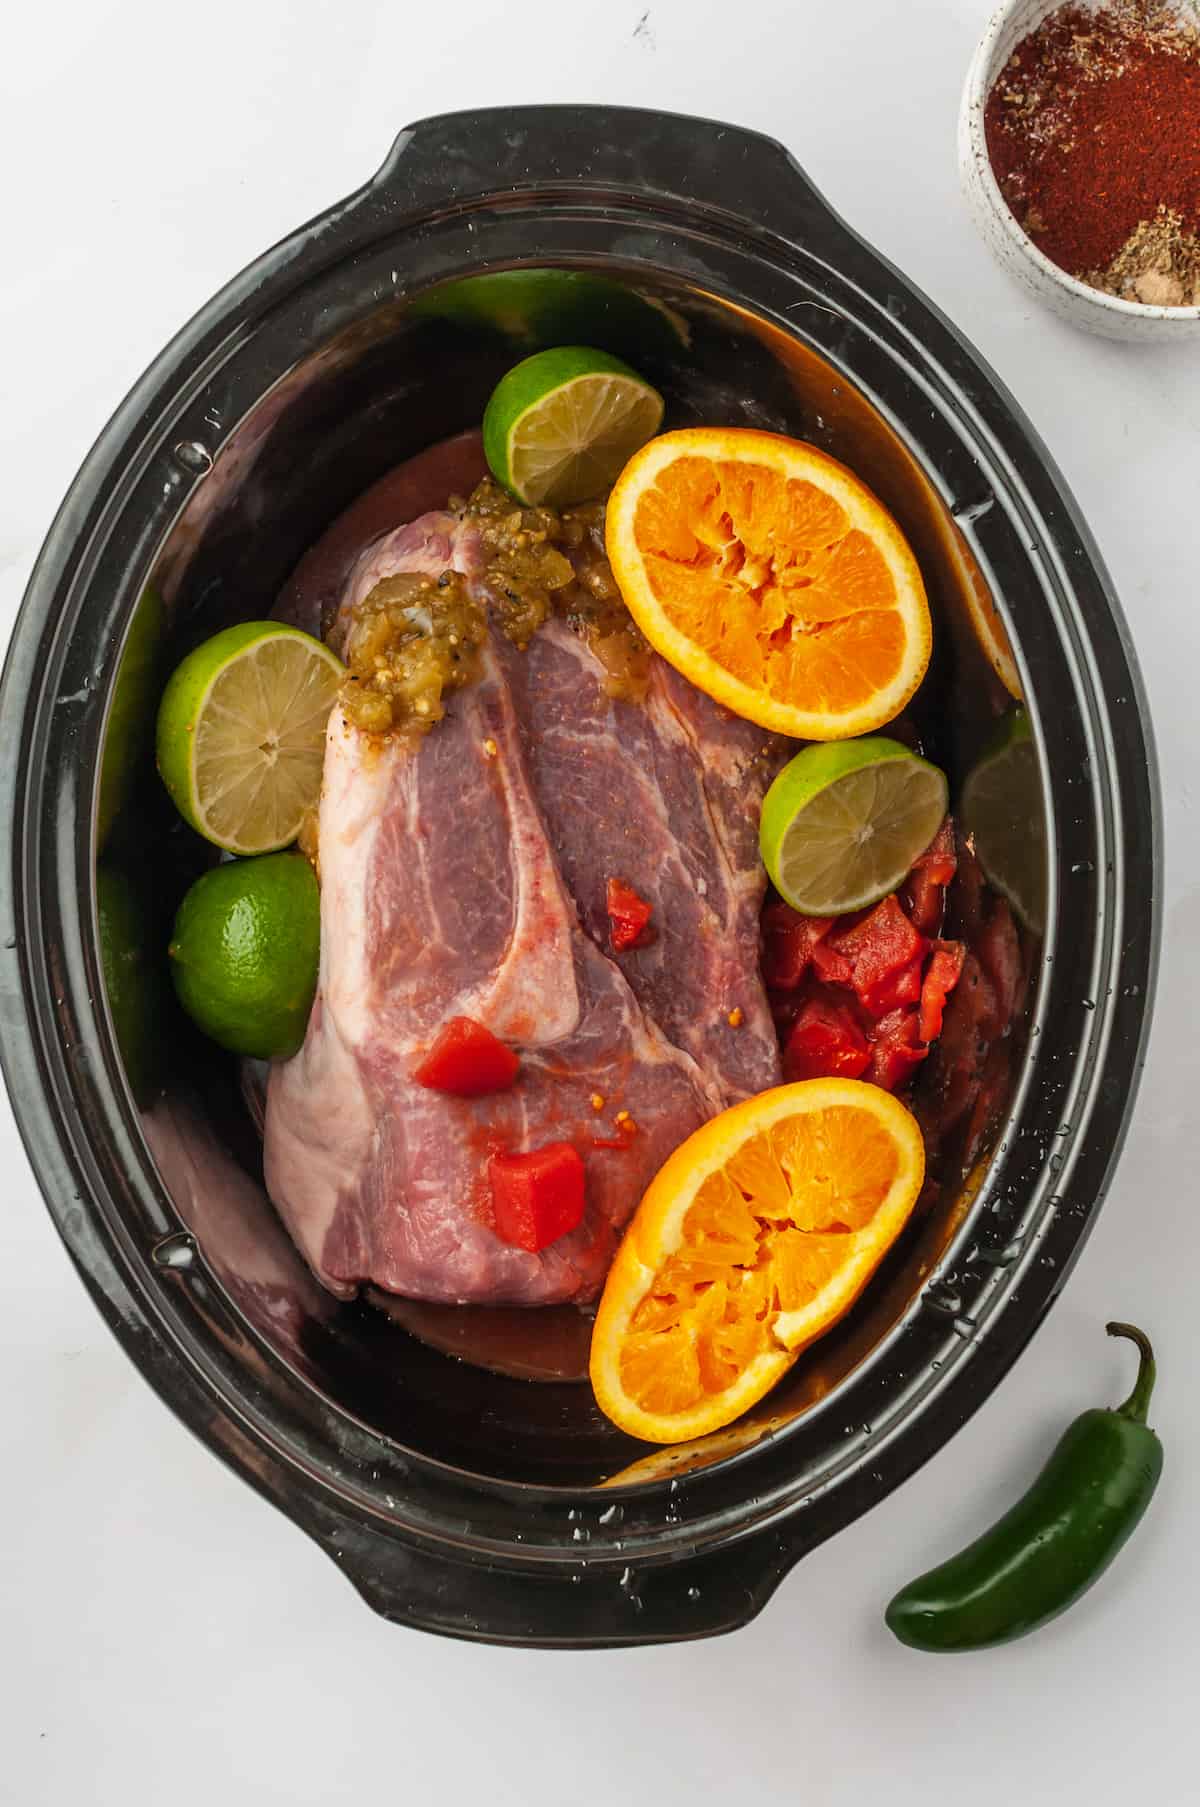 Overhead view of pork in slow cooker with tomatoes, limes, and oranges